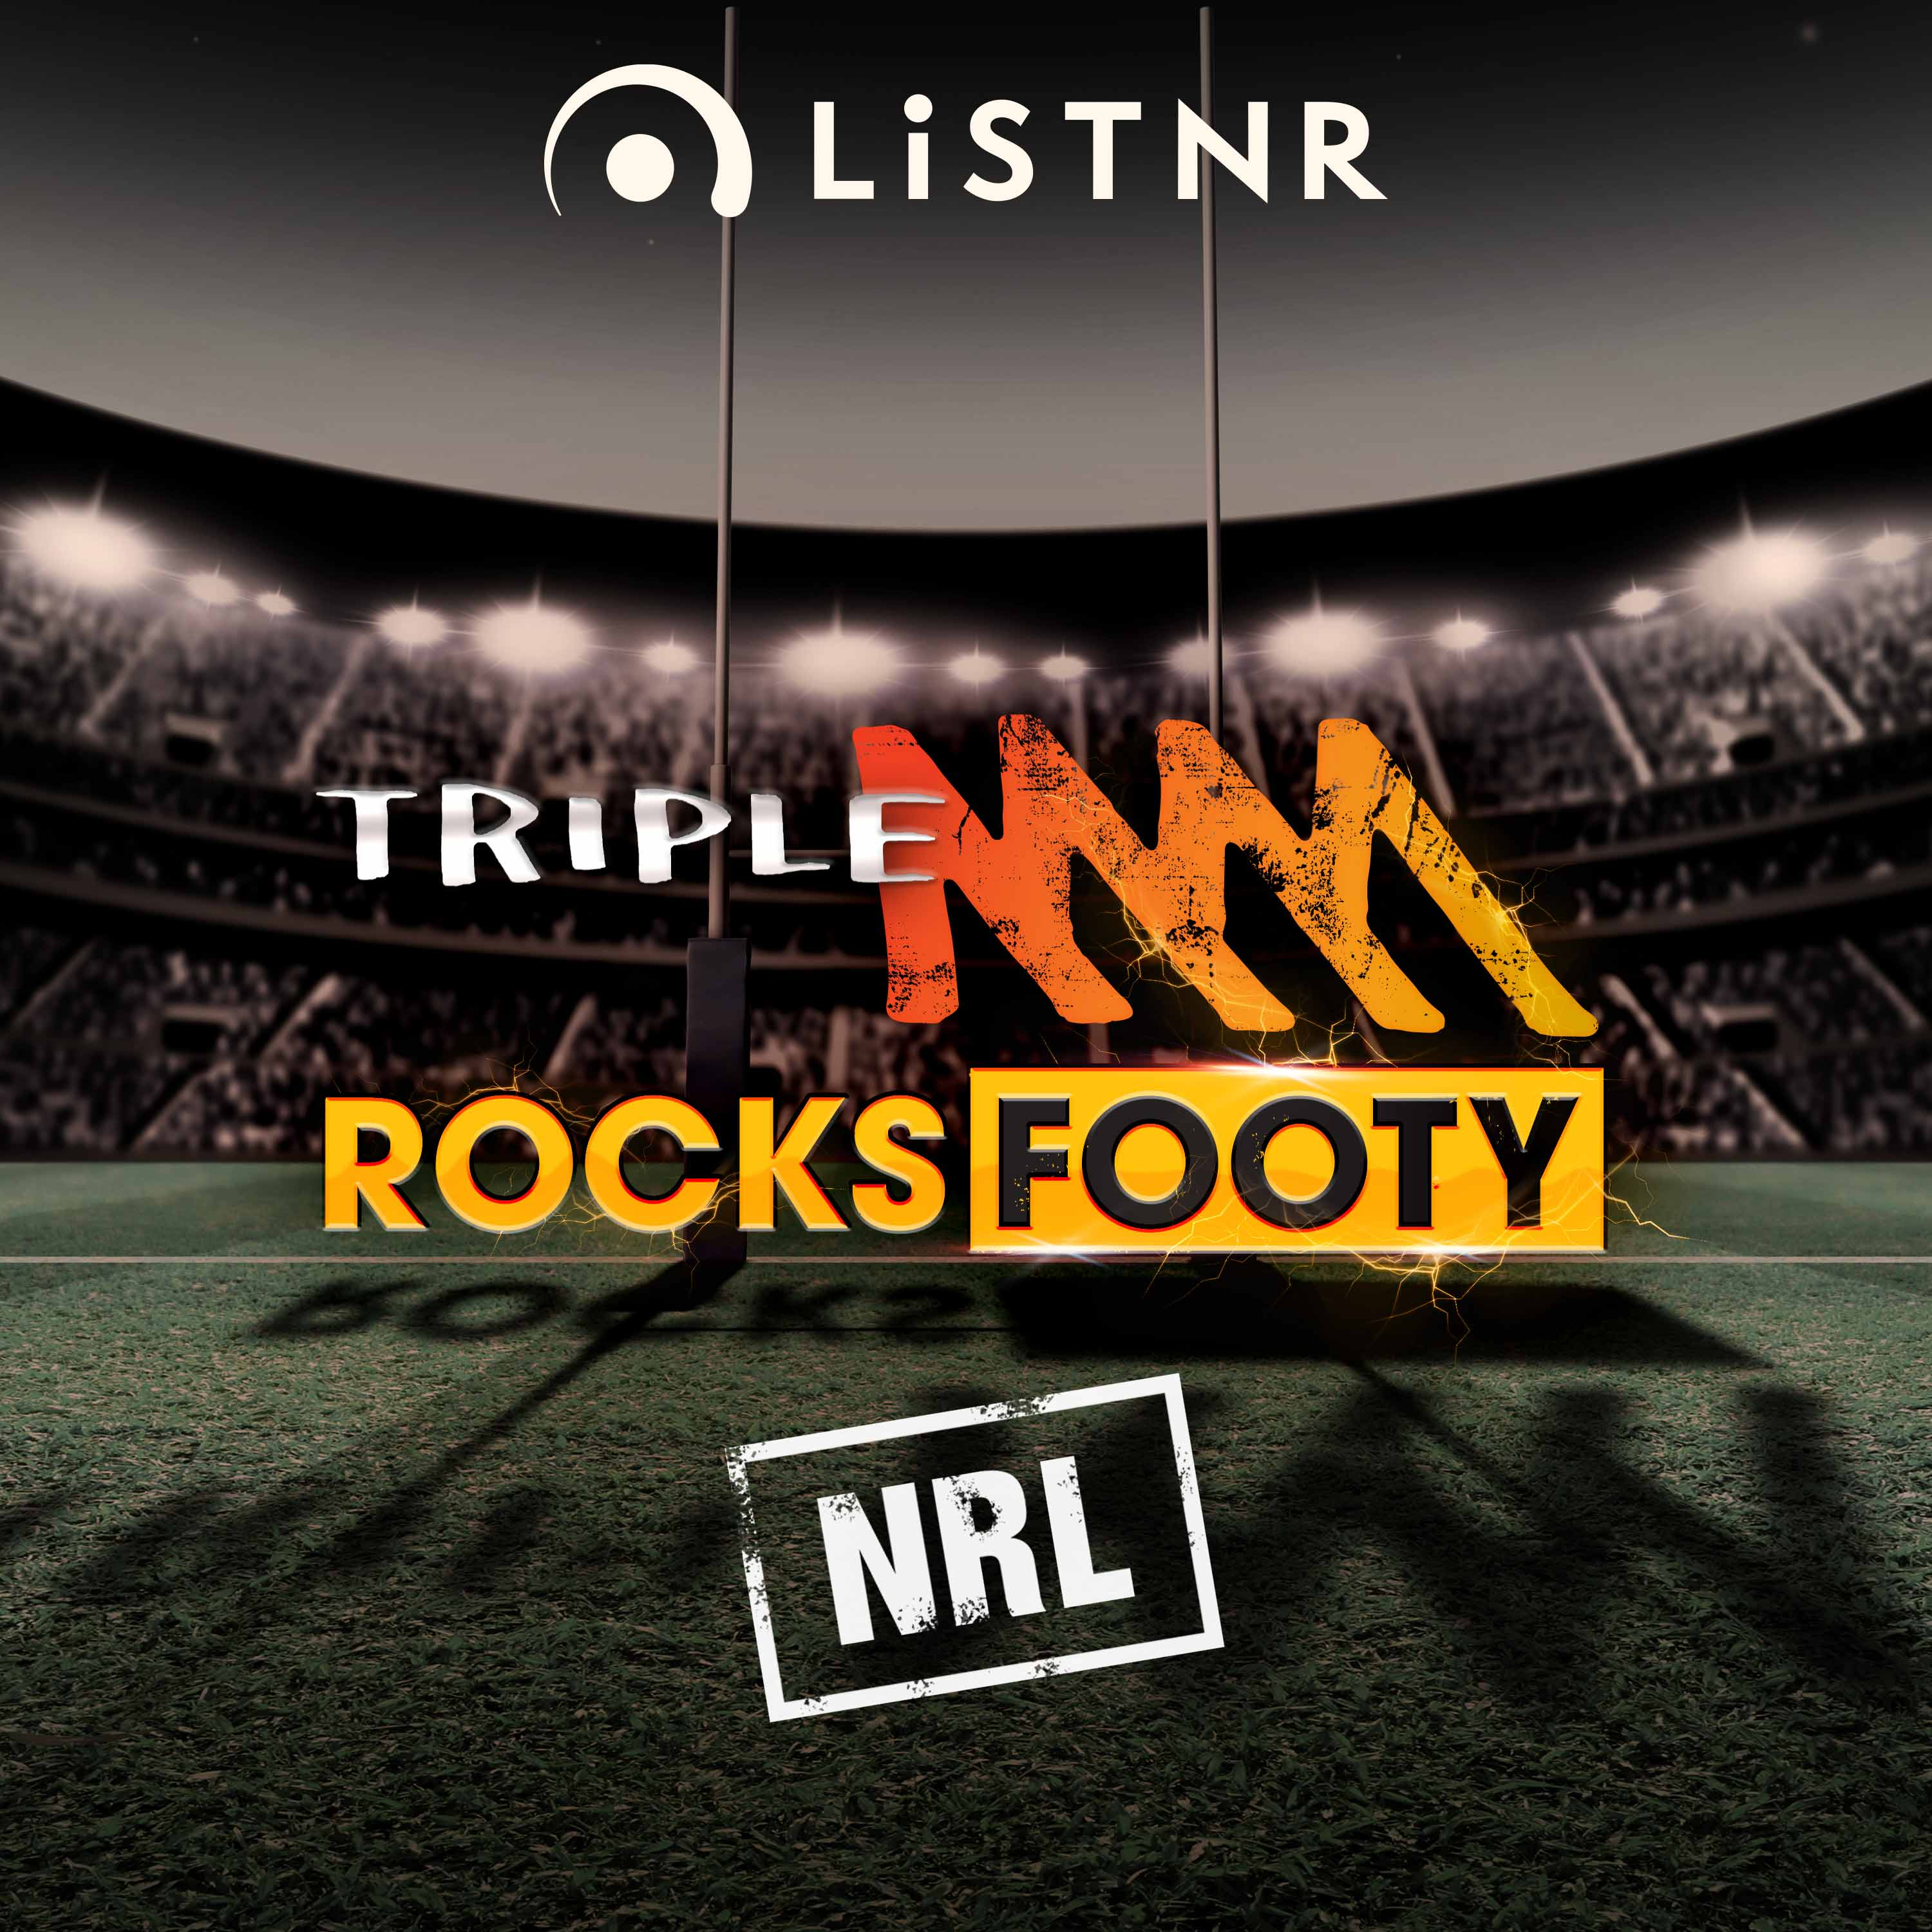 Is There More To Kalyn Ponga's Injury? | Triple M NRL's Thursday Night Footy Show